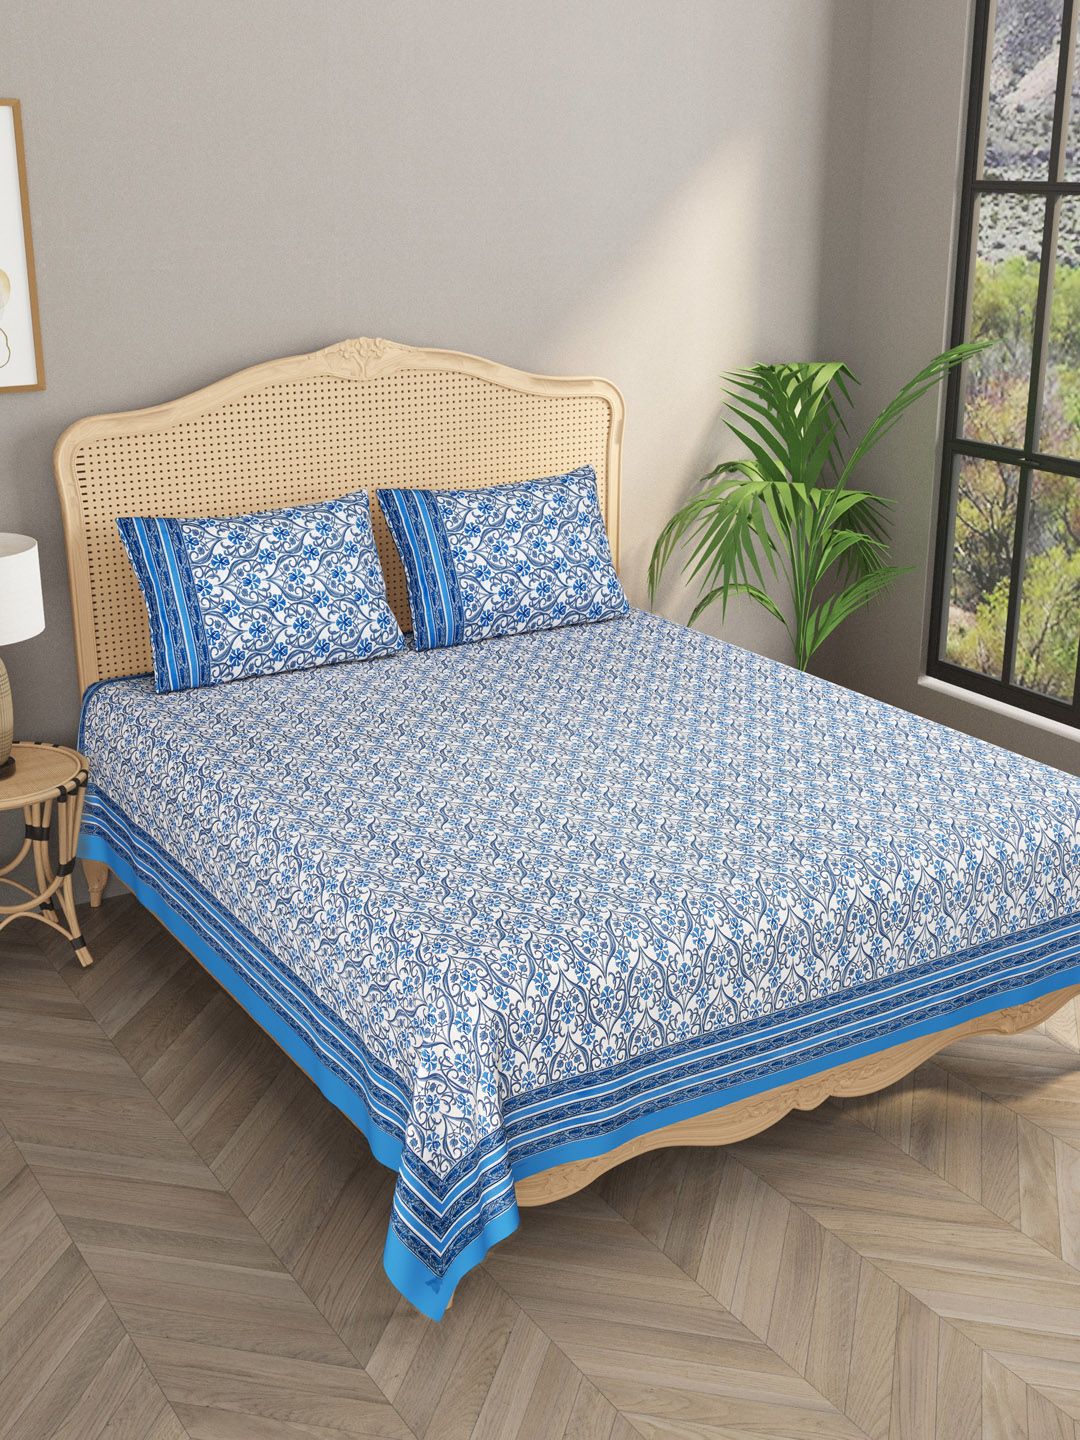 Gulaab Jaipur Blue & White Ethnic Motifs 600 TC Cotton King Bedsheet with 2 Pillow Covers Price in India